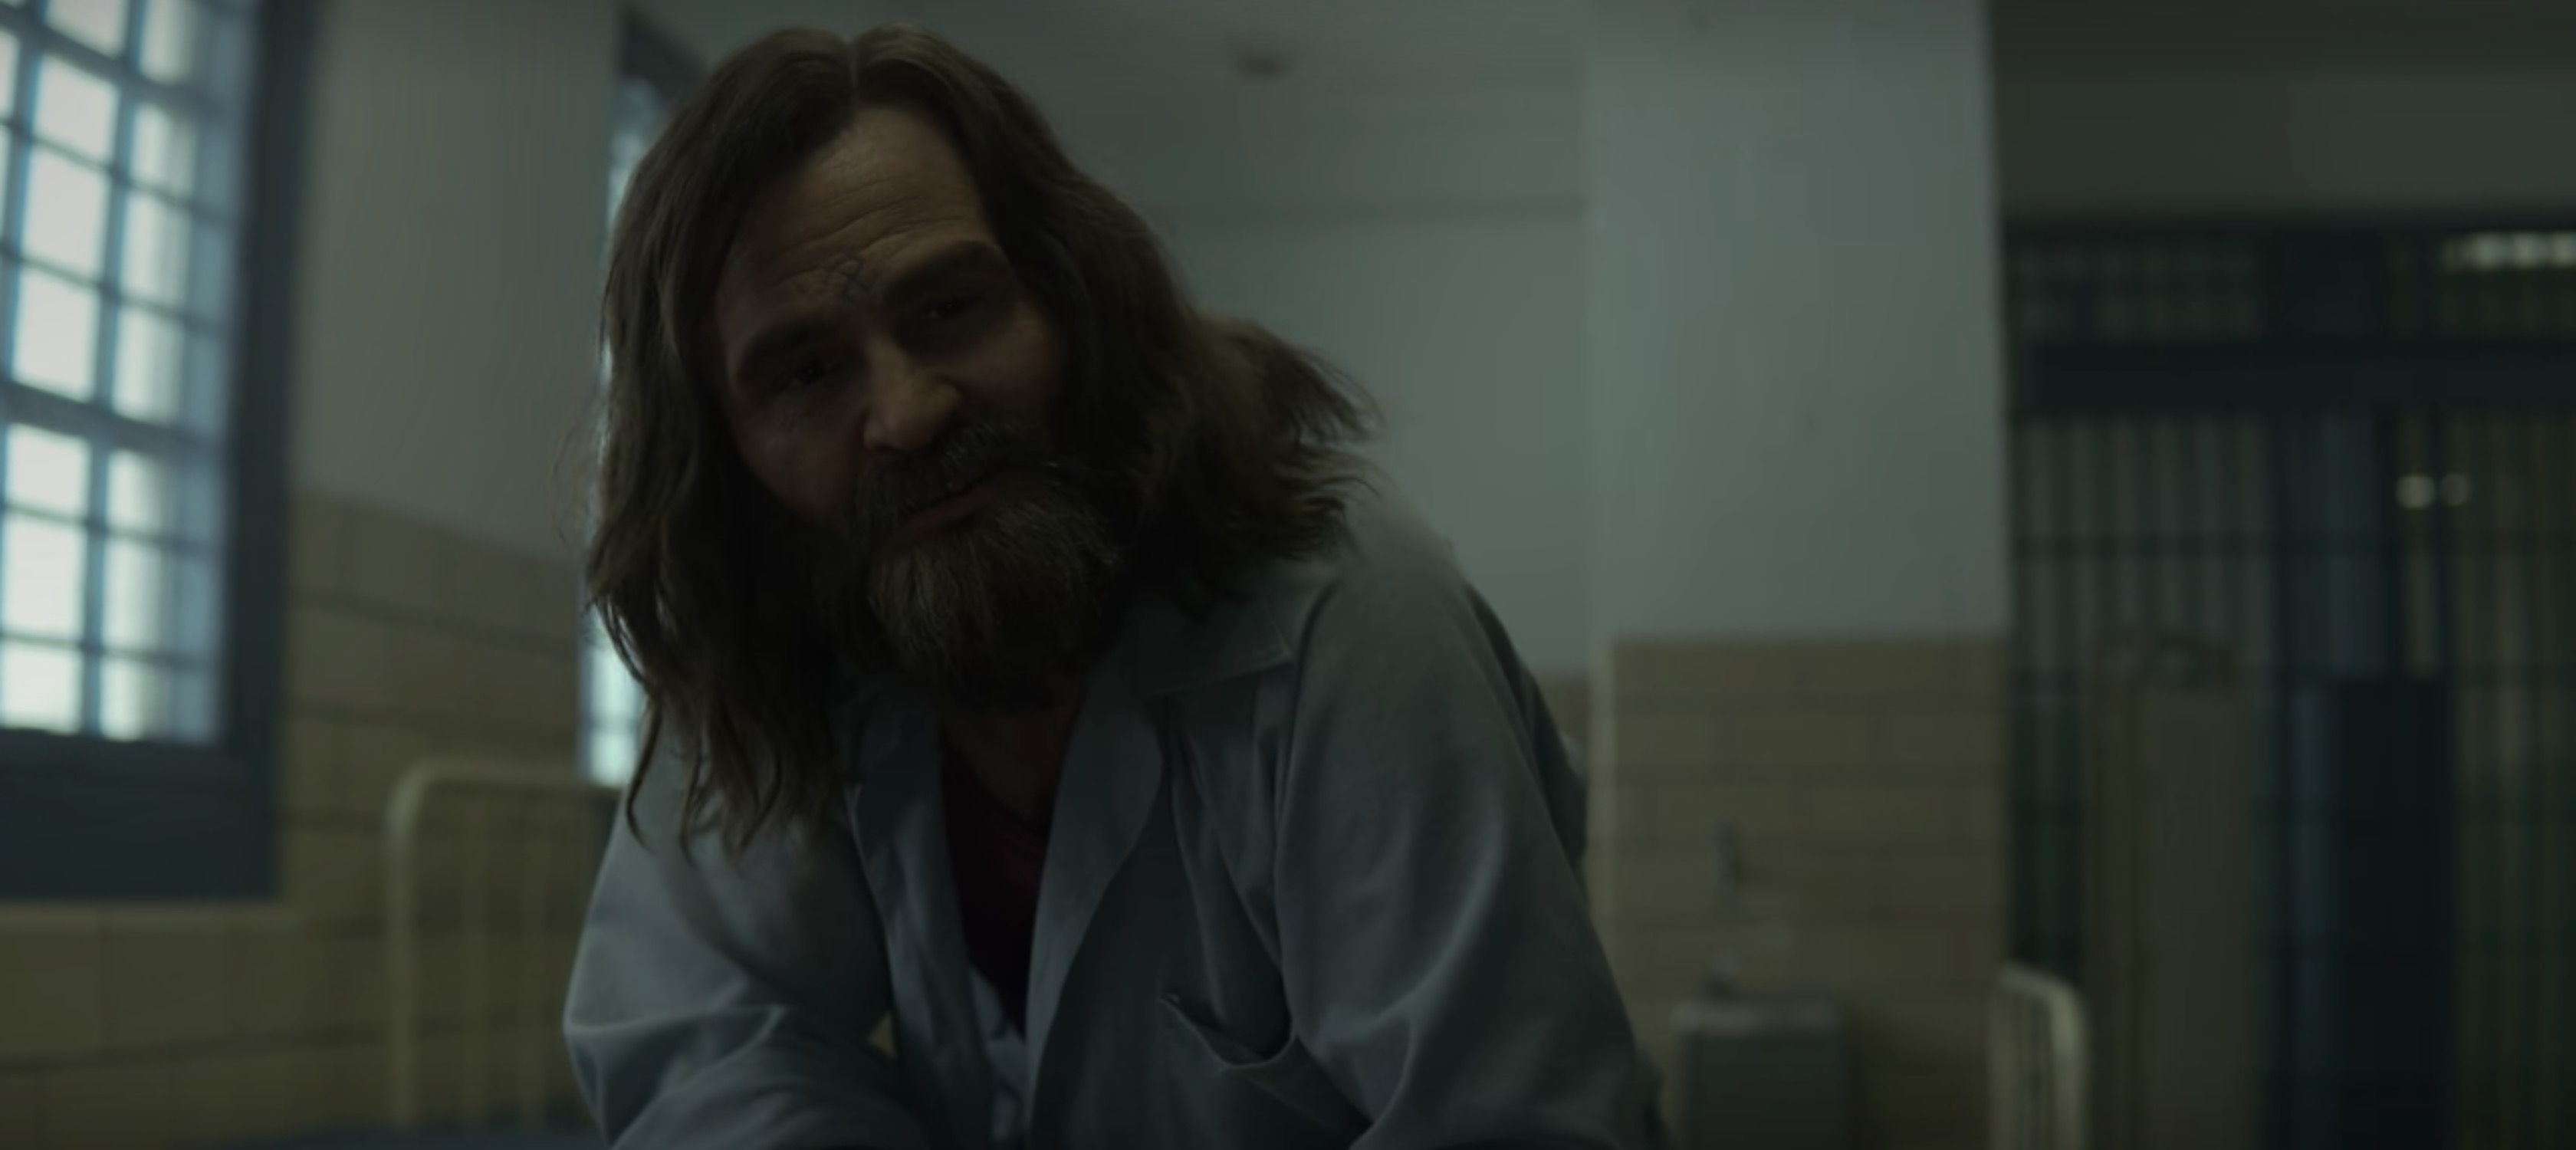 A Guide To The Serial Killers Featured In 'Mindhunter' Season 2